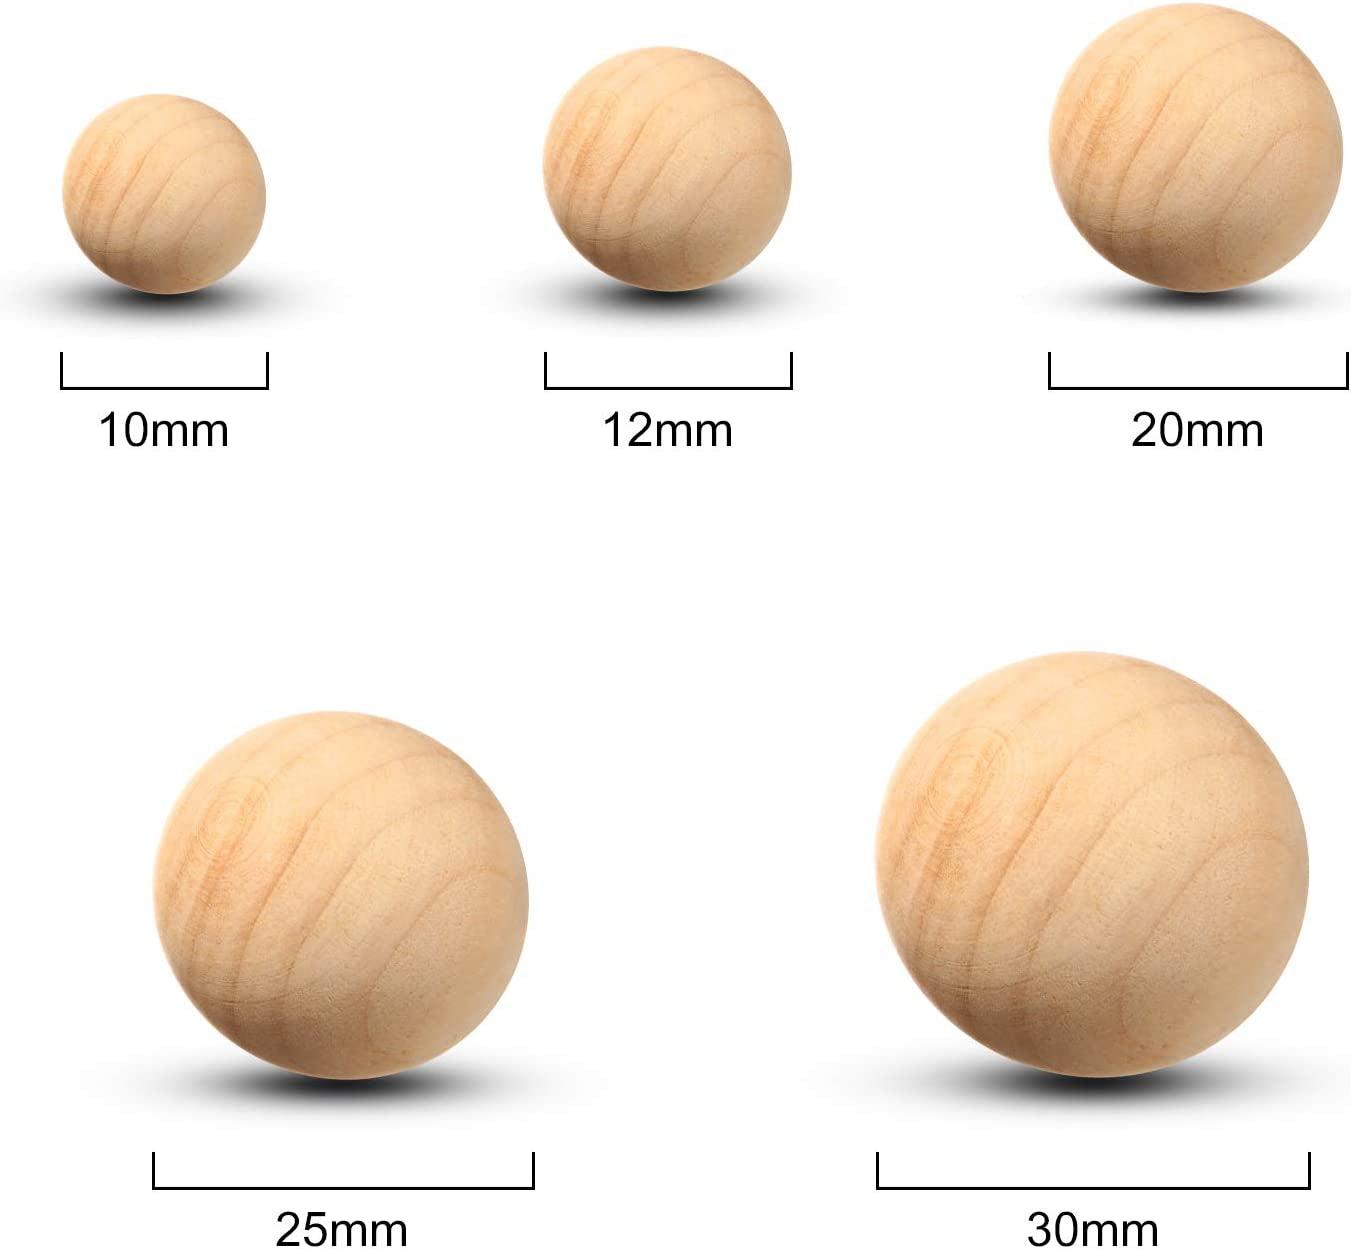 88 Pieces Wood Ball Wood Craft Balls Unfinished round Wooden Balls for DIY Craft Projects Jewelry Making Art Design in 5 Sizes - WoodArtSupply